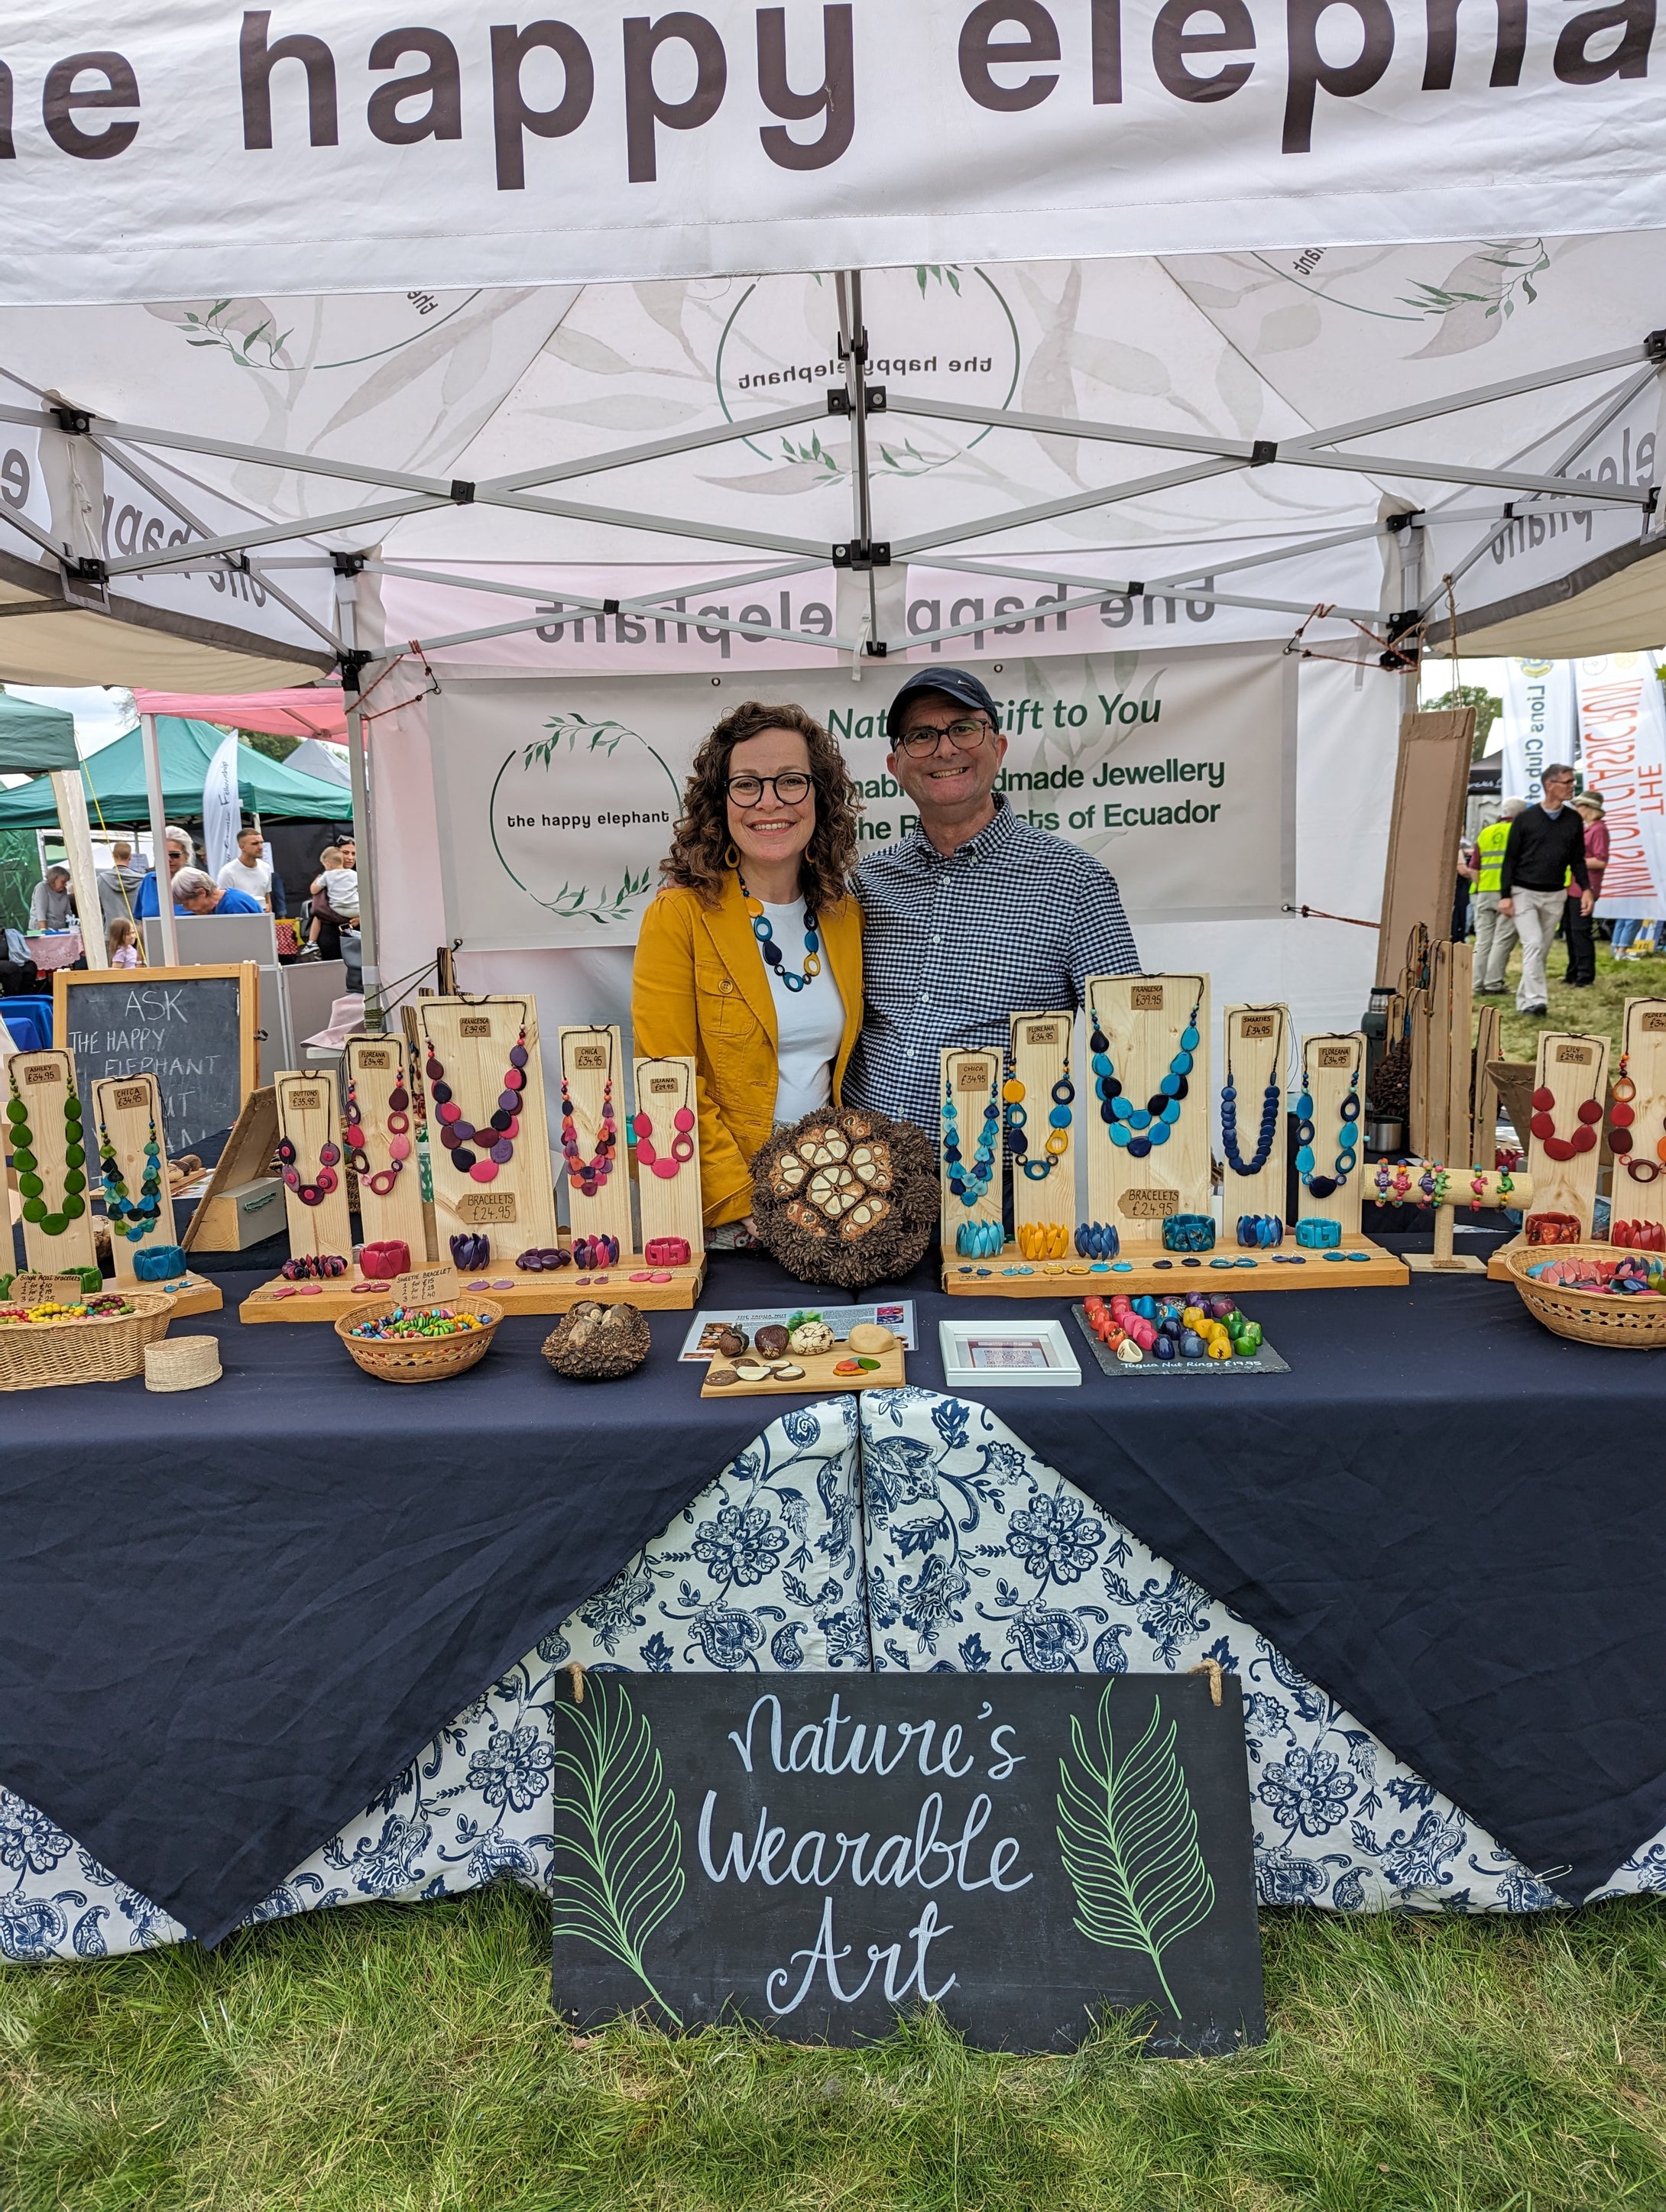 Mark and Alison Williams at their market stall The Happy Elephant selling tagua nut jewellery ery